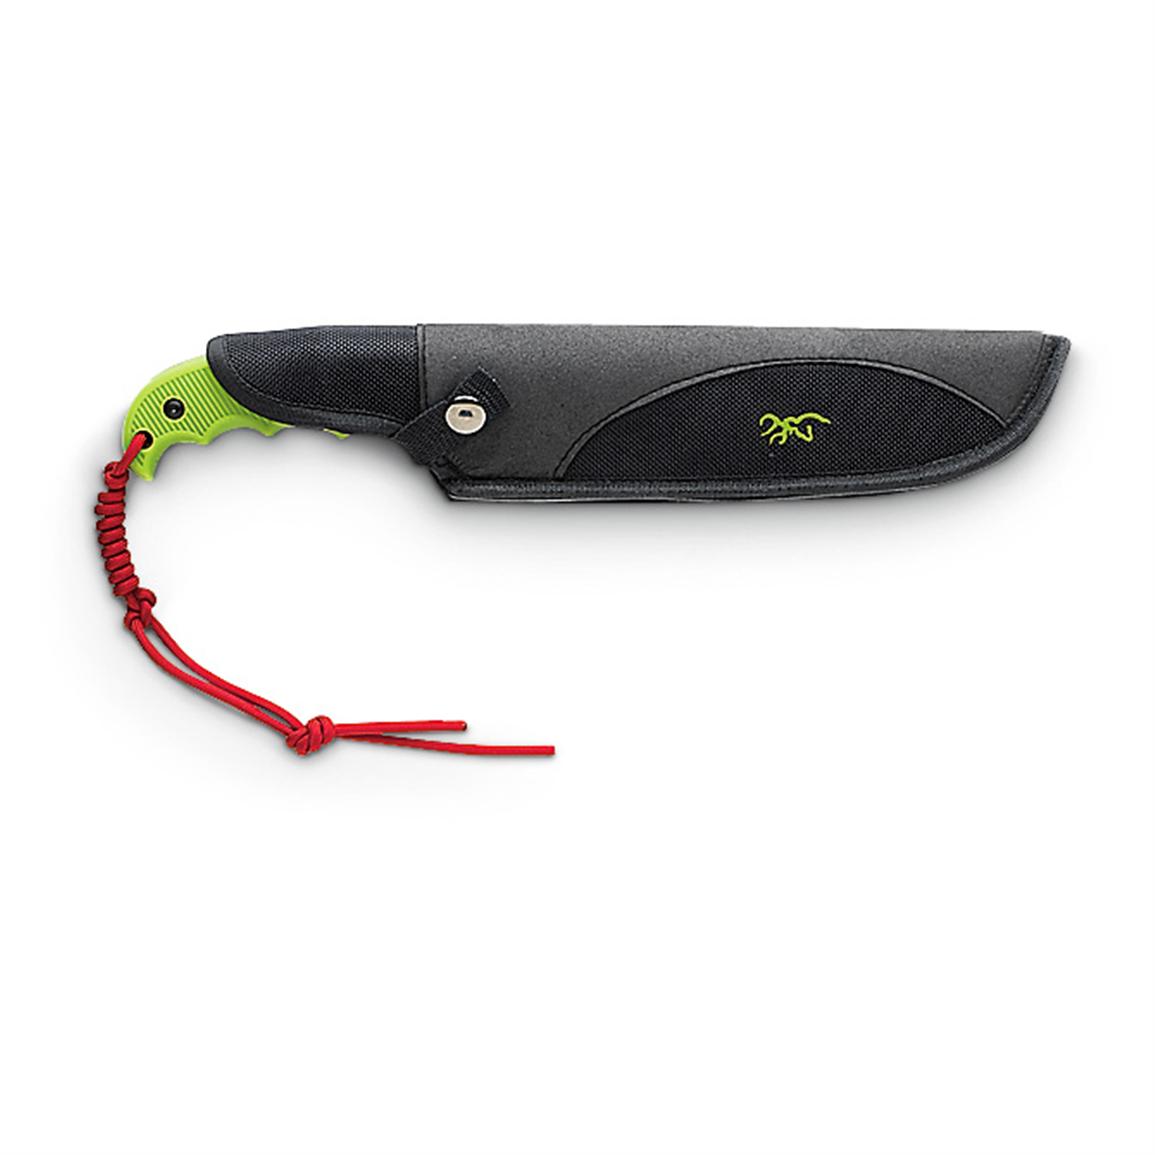 Zombie Apocalypse Knife - 224781, Tactical Knives at Sportsman's Guide